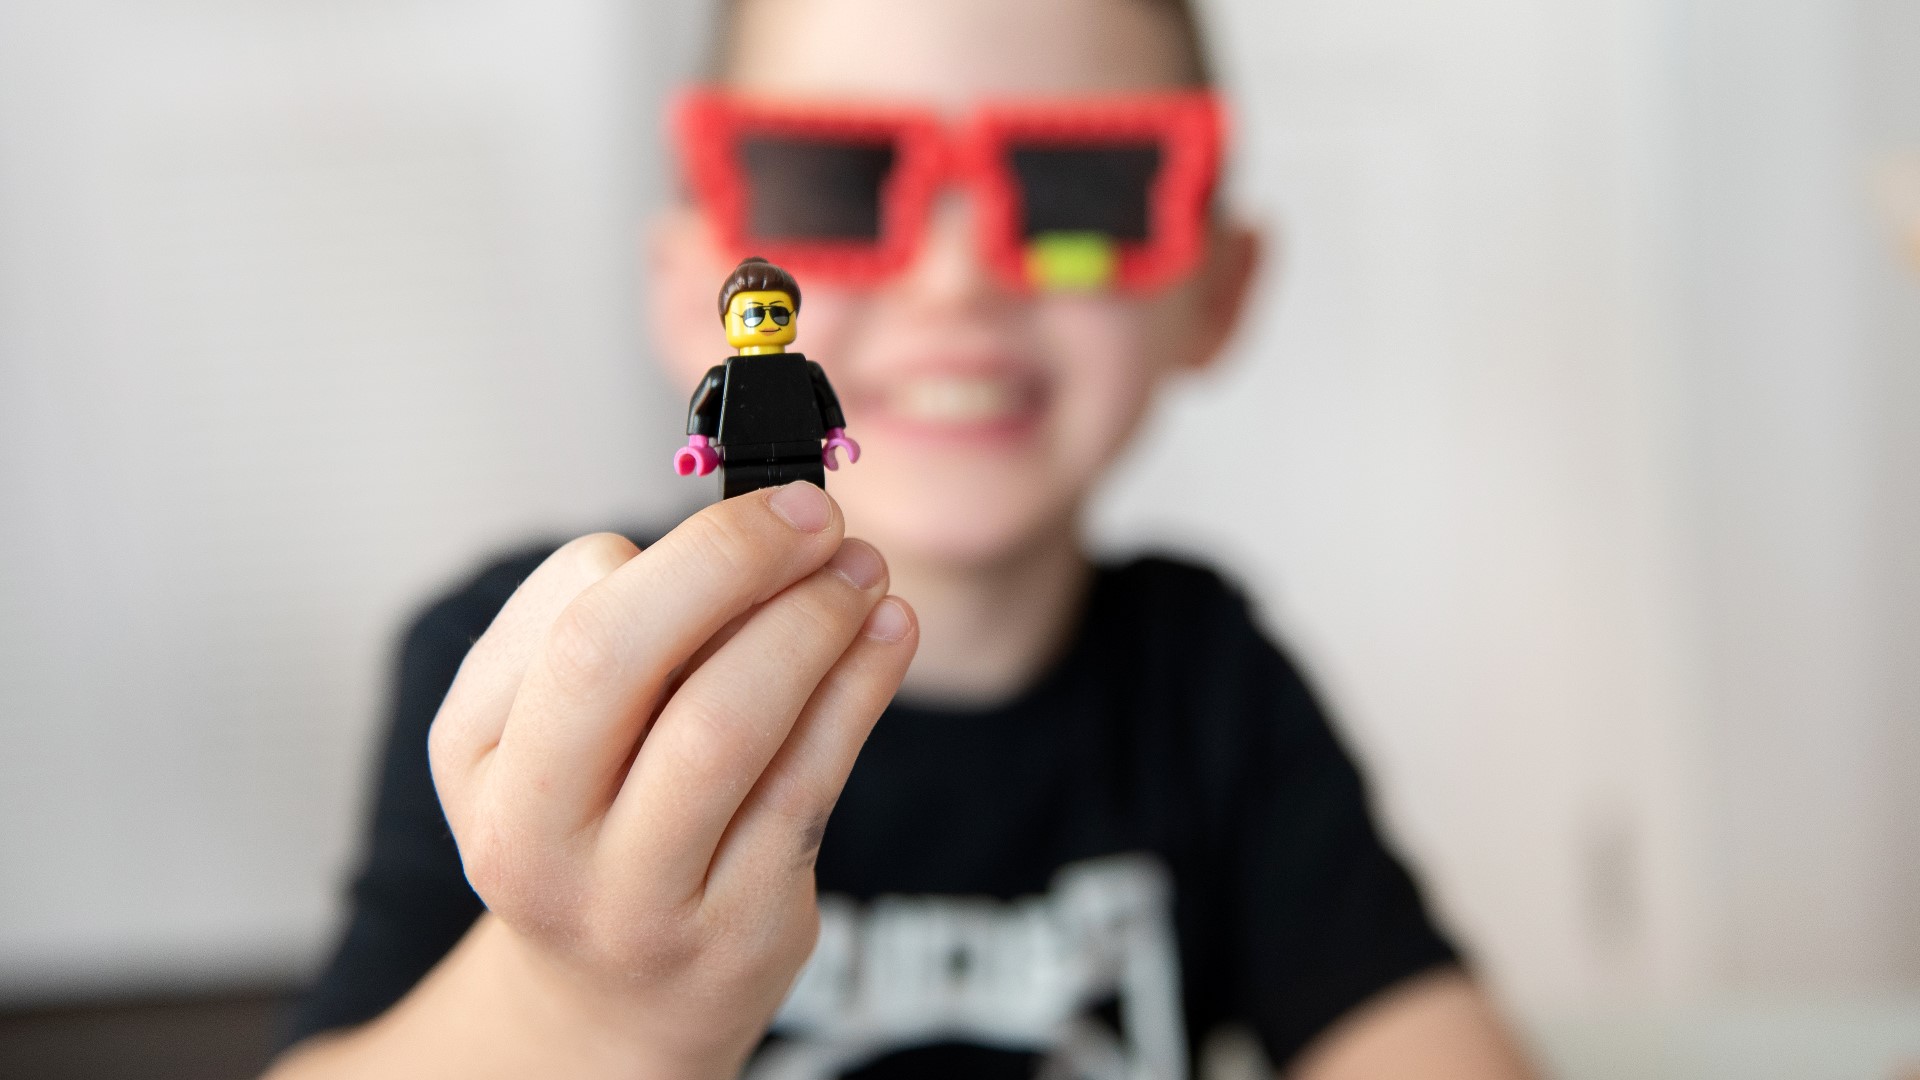 Cody Bassey's skill with Legos might only be rivaled by his heart. The 9-year-old is using his Lego know-how to raise funds for a cancer awareness group.